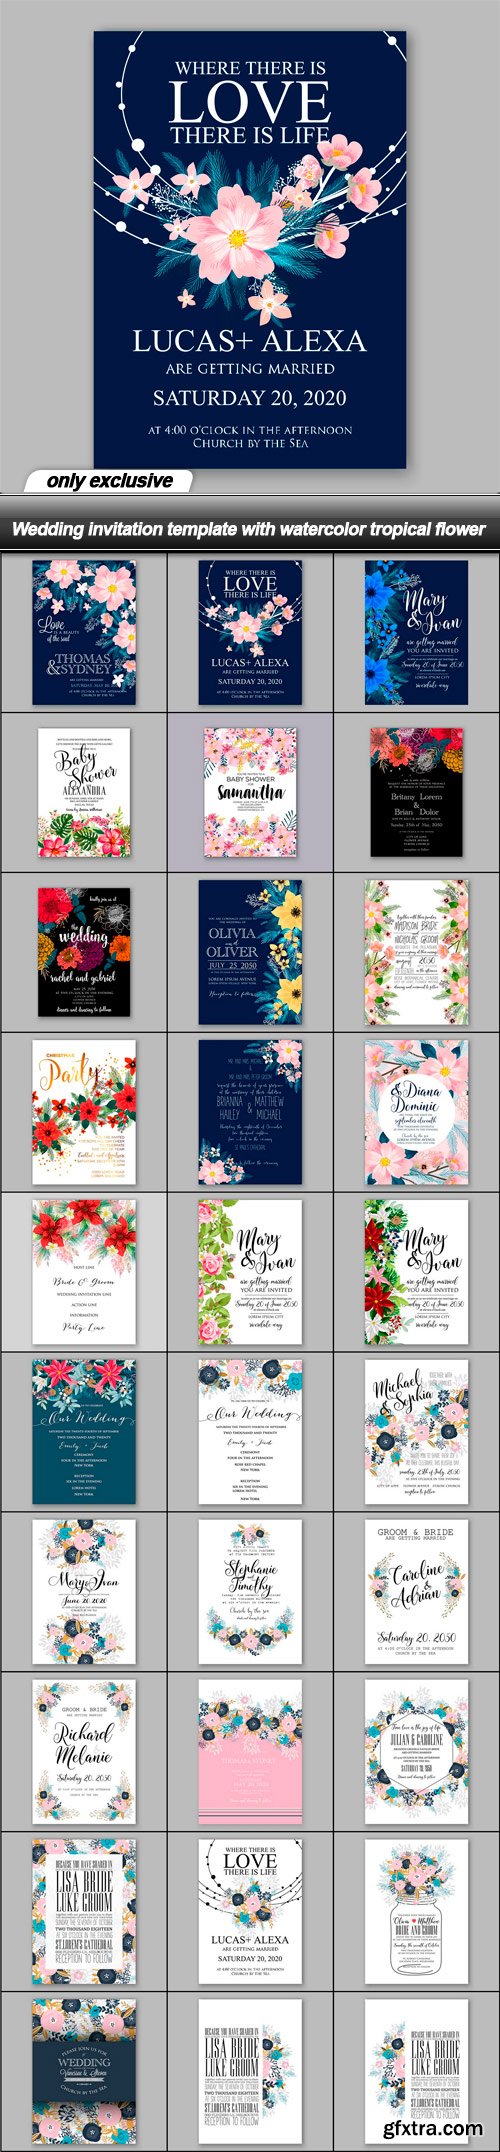 Wedding invitation template with watercolor tropical flower - 30 EPS